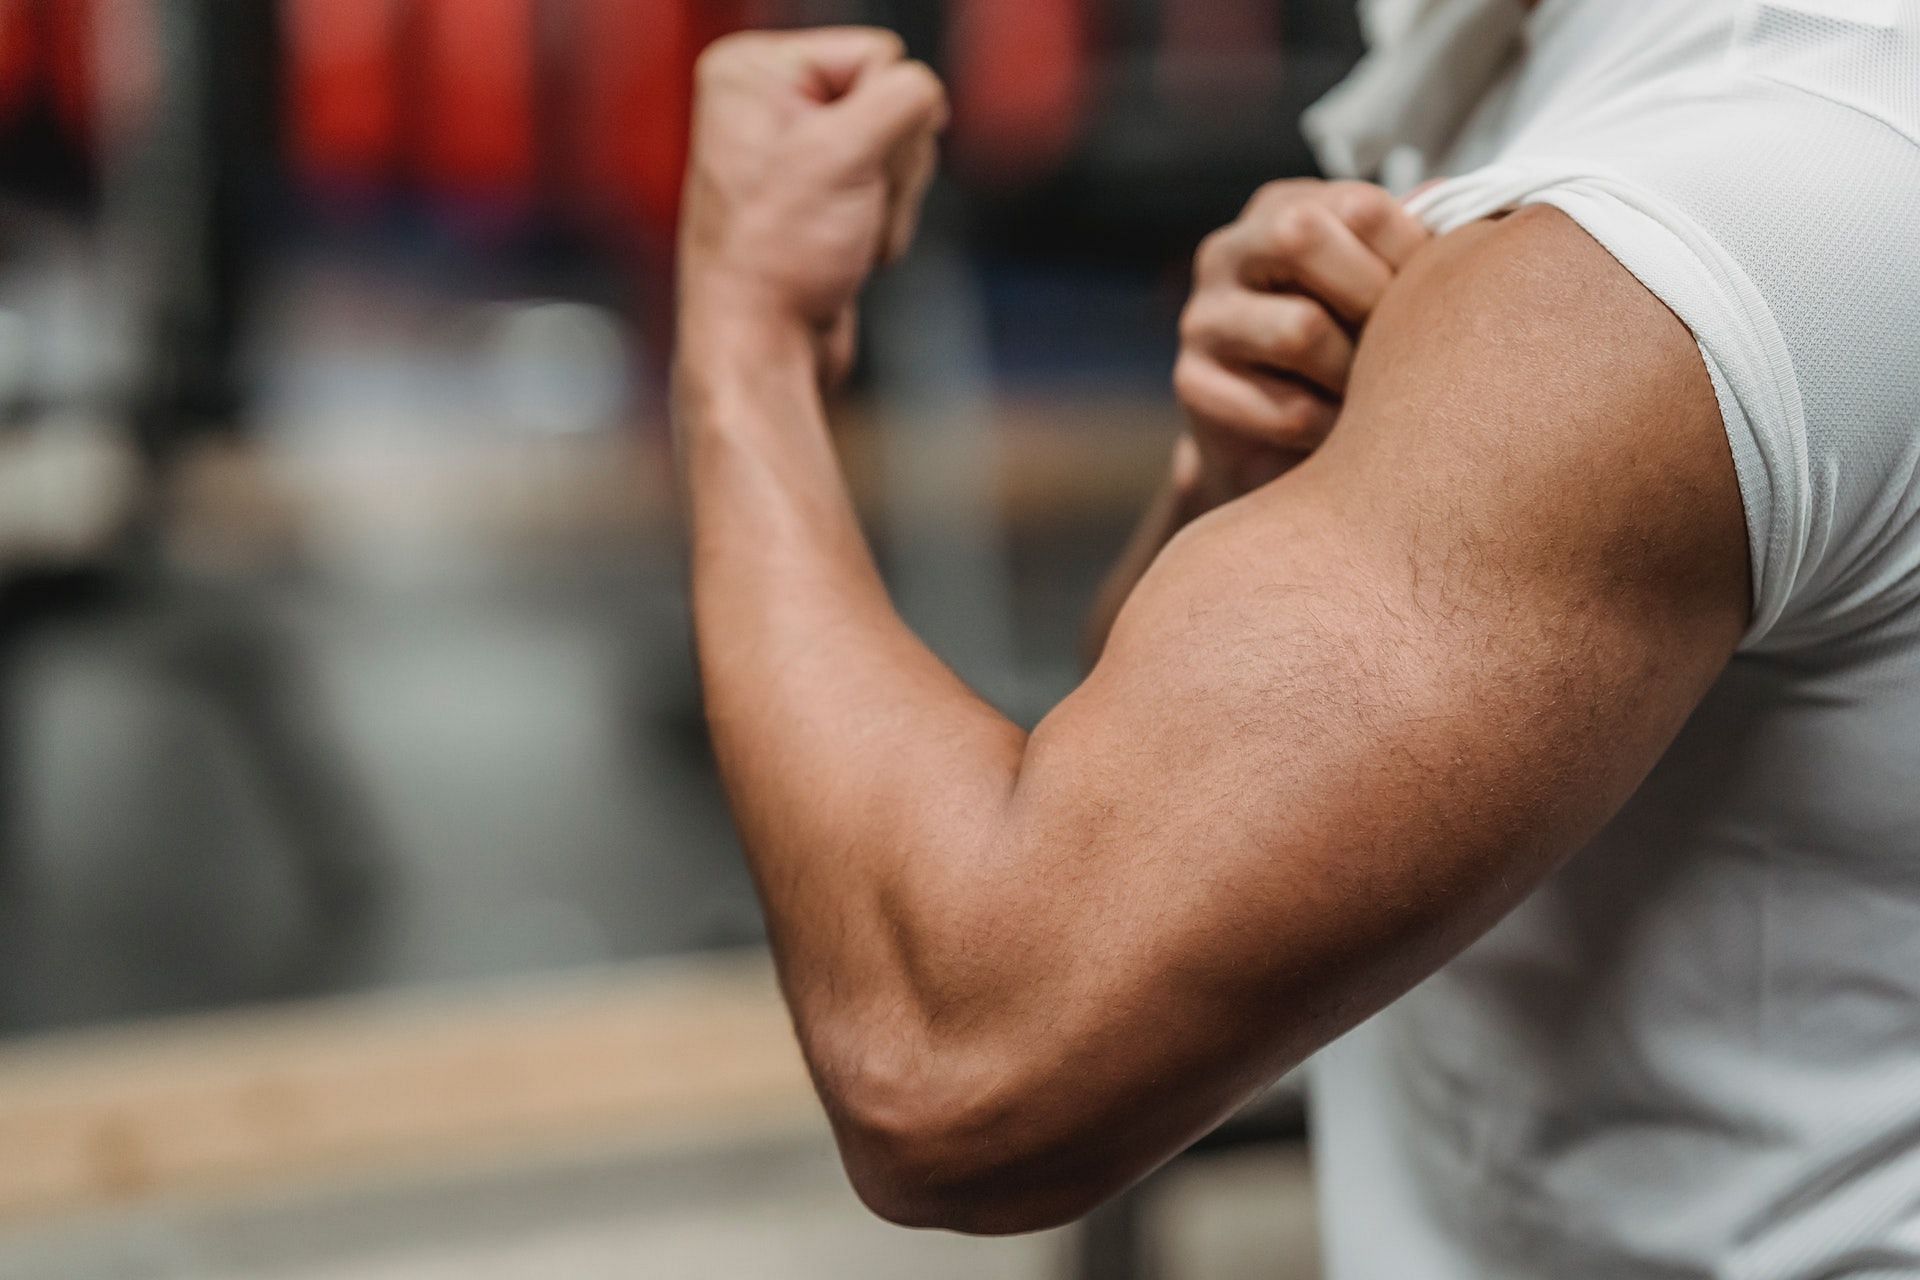 The lateral triceps head exercises build strength and size. (Photo via Pexels/Julia Larson)